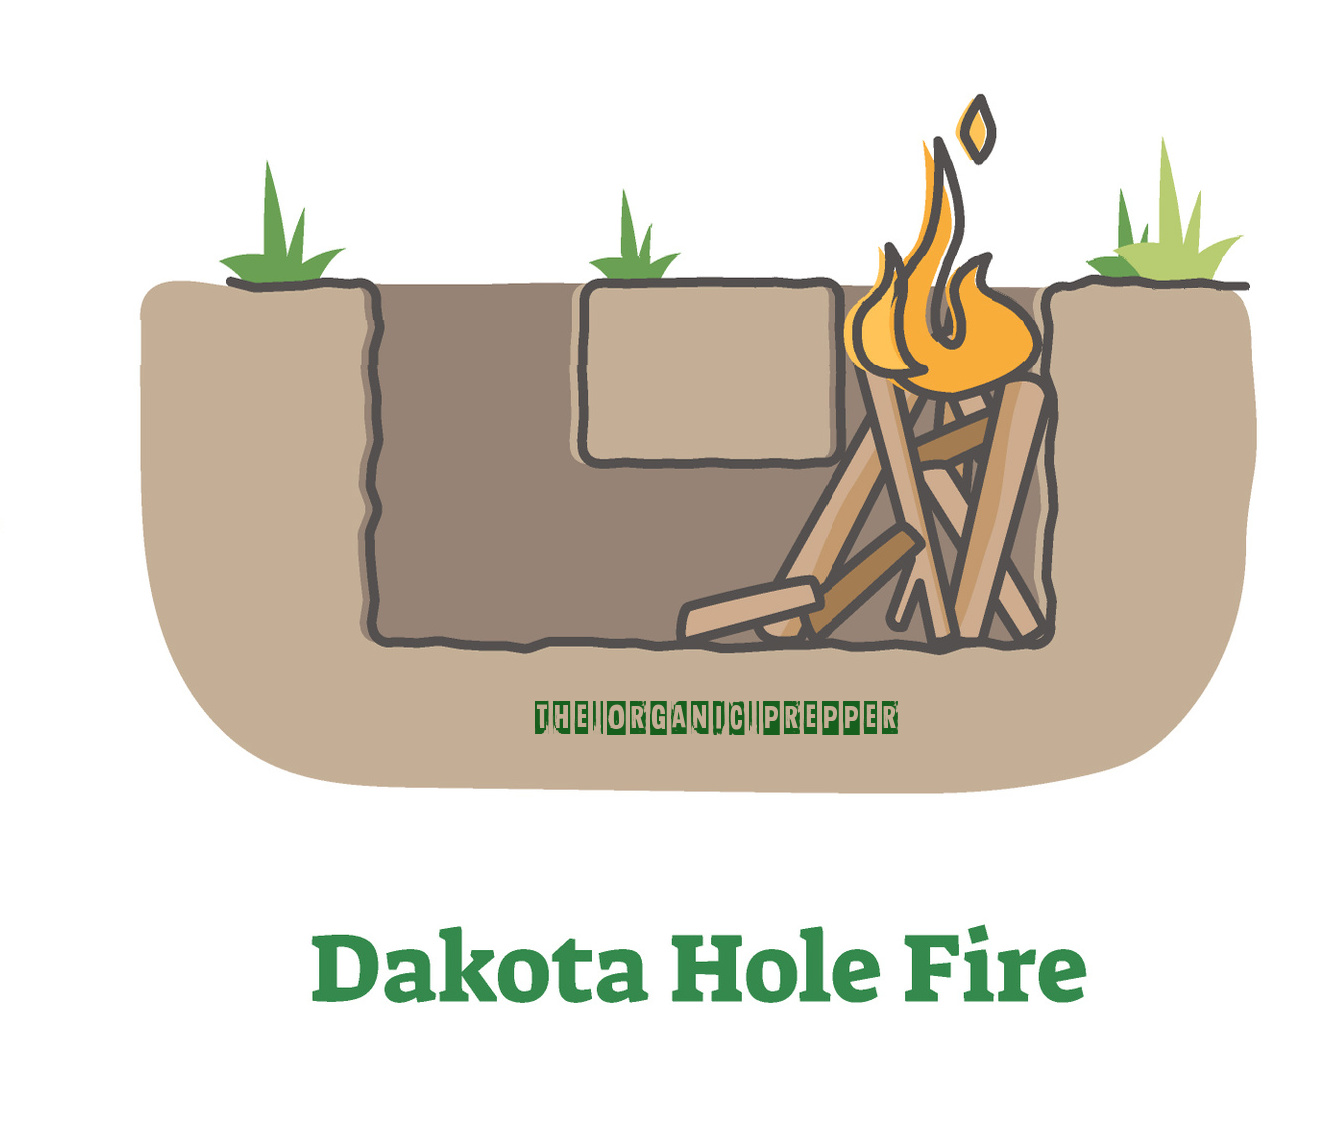 Fire on the hole. Fire in the hole арт. Fire in the hole рисунок. Fire in the hole звук. Fire in hole наримованный.